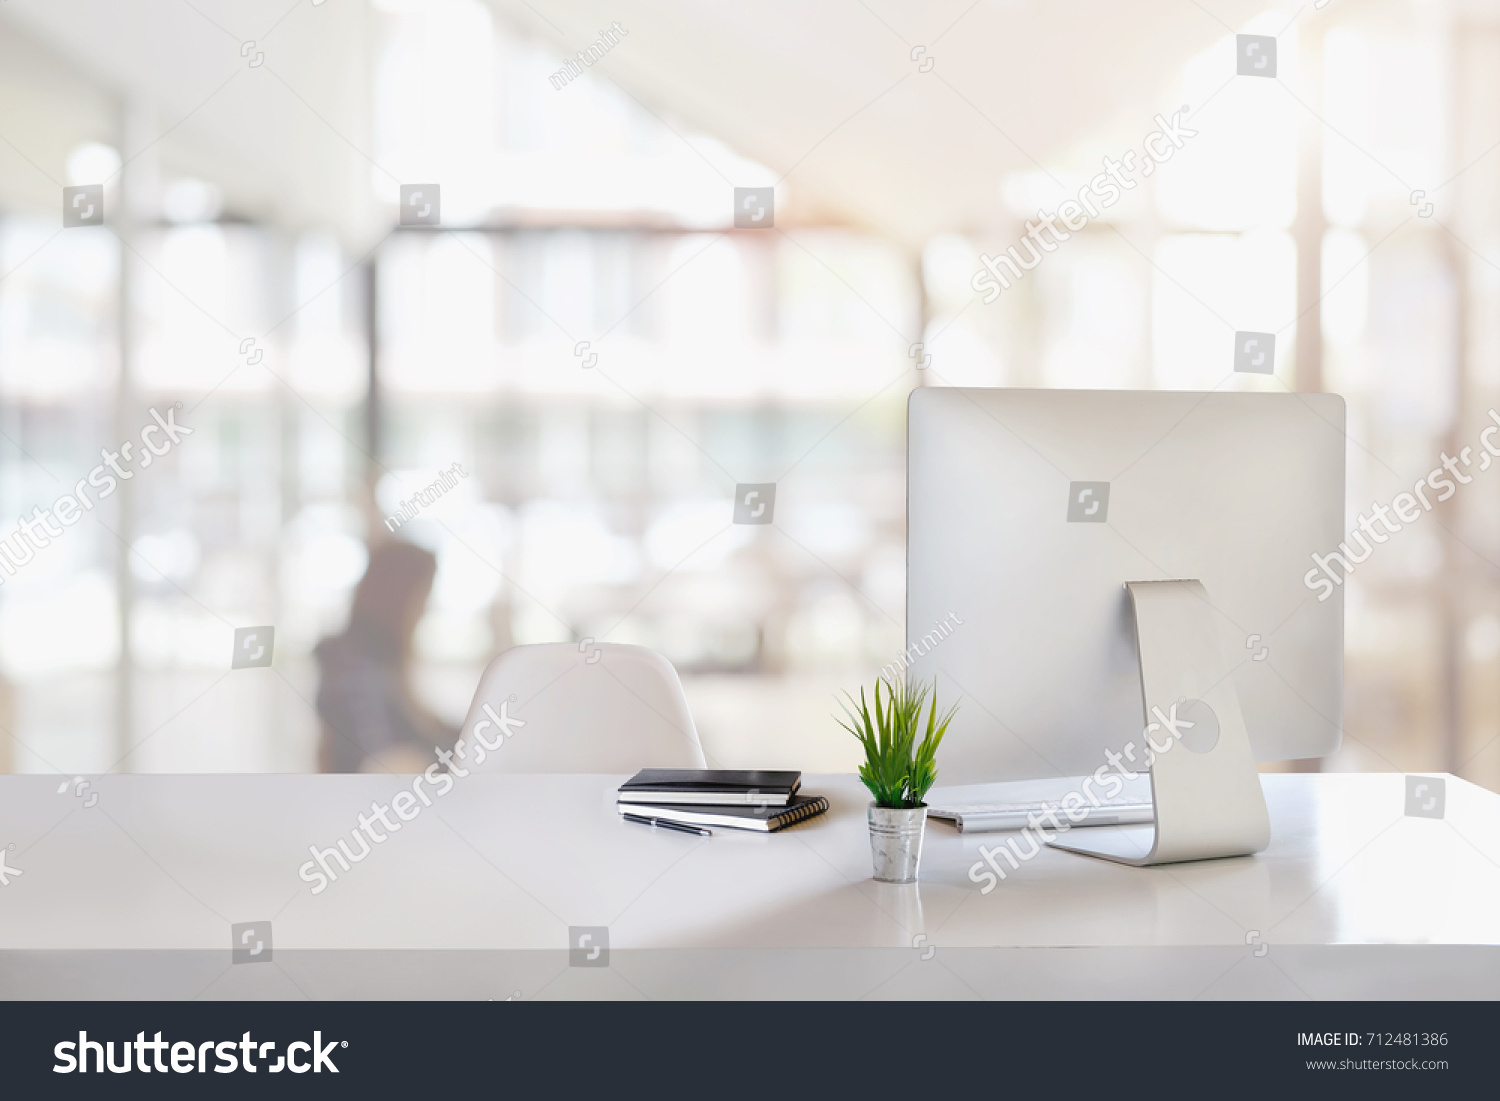 Stylish workspace with desktop computer, office supplies, houseplant and books at office. desk work concept. #712481386